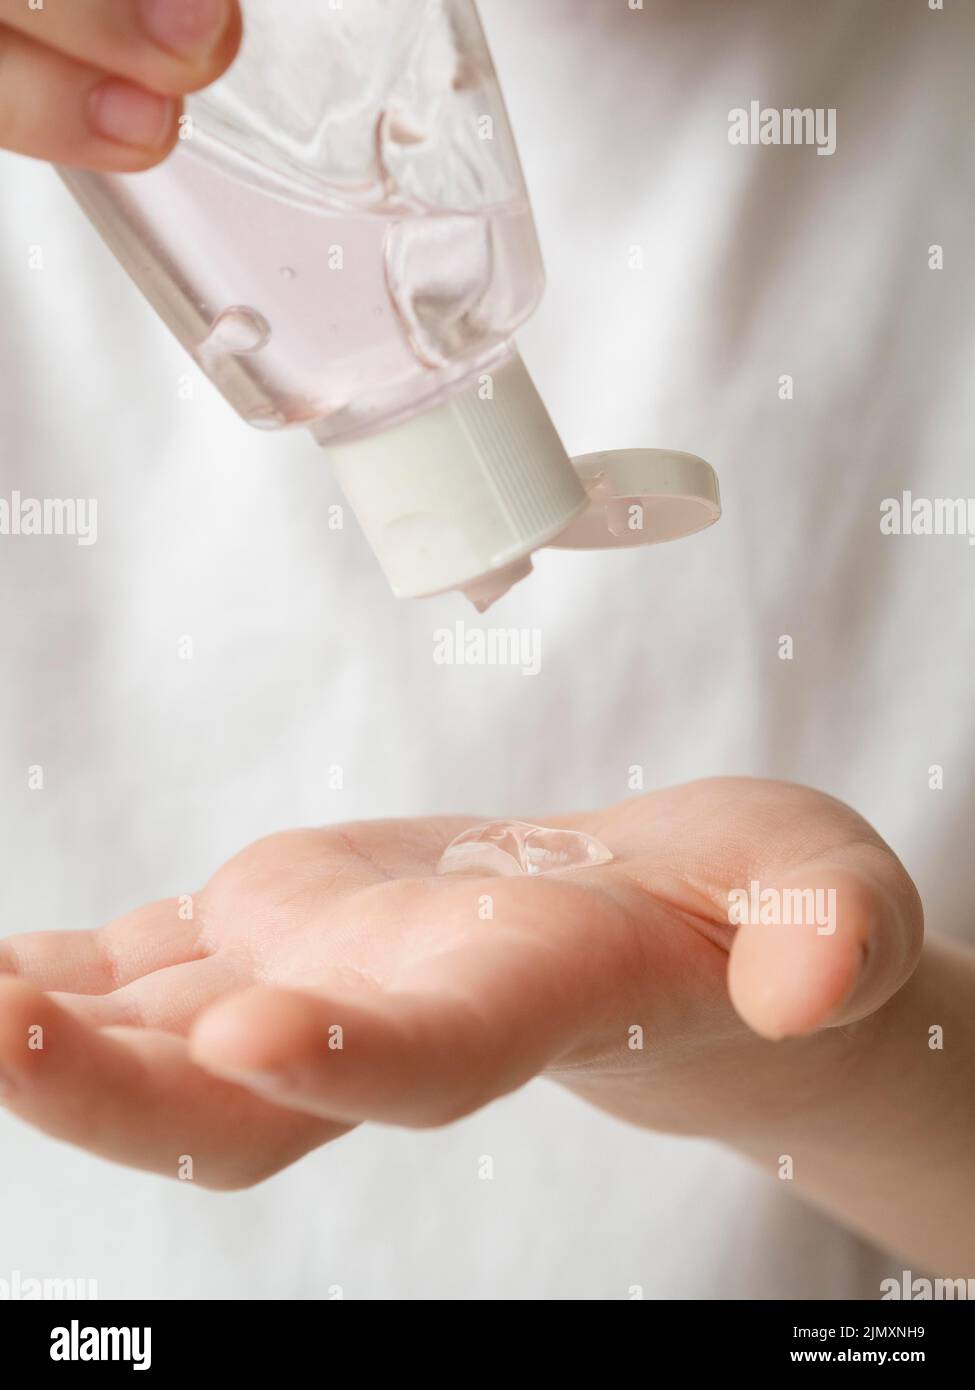 Front view child using hand sanitizer Stock Photo